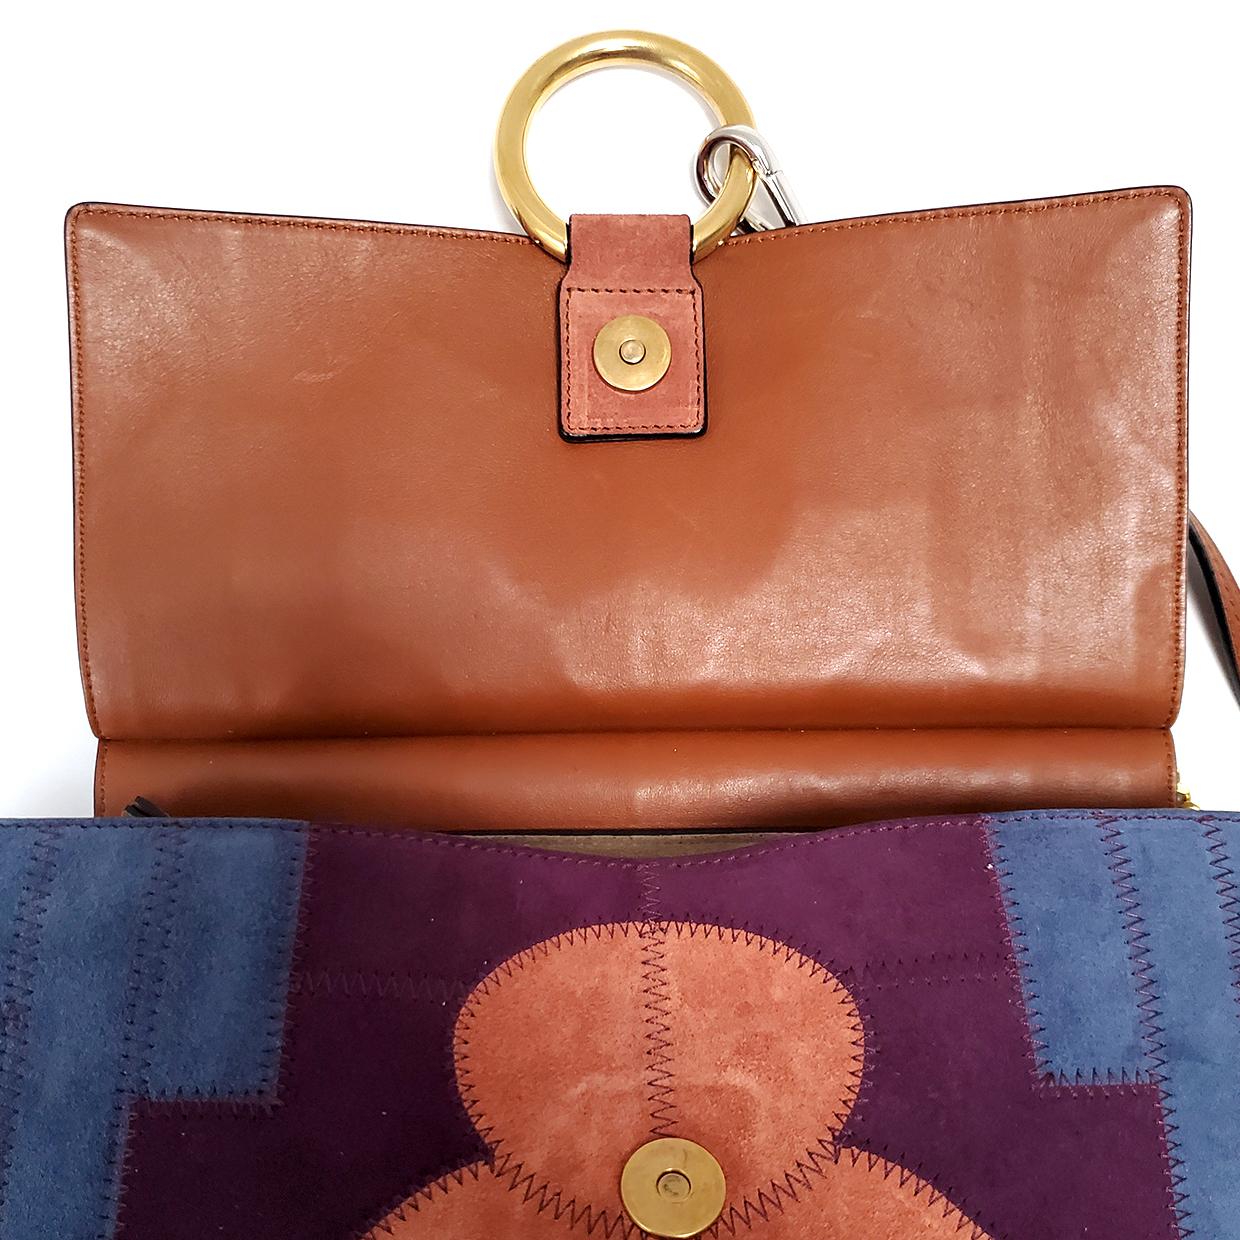 Chloe Faye Multicolor Patchwork Hand Bag In Excellent Condition For Sale In Columbia, MO